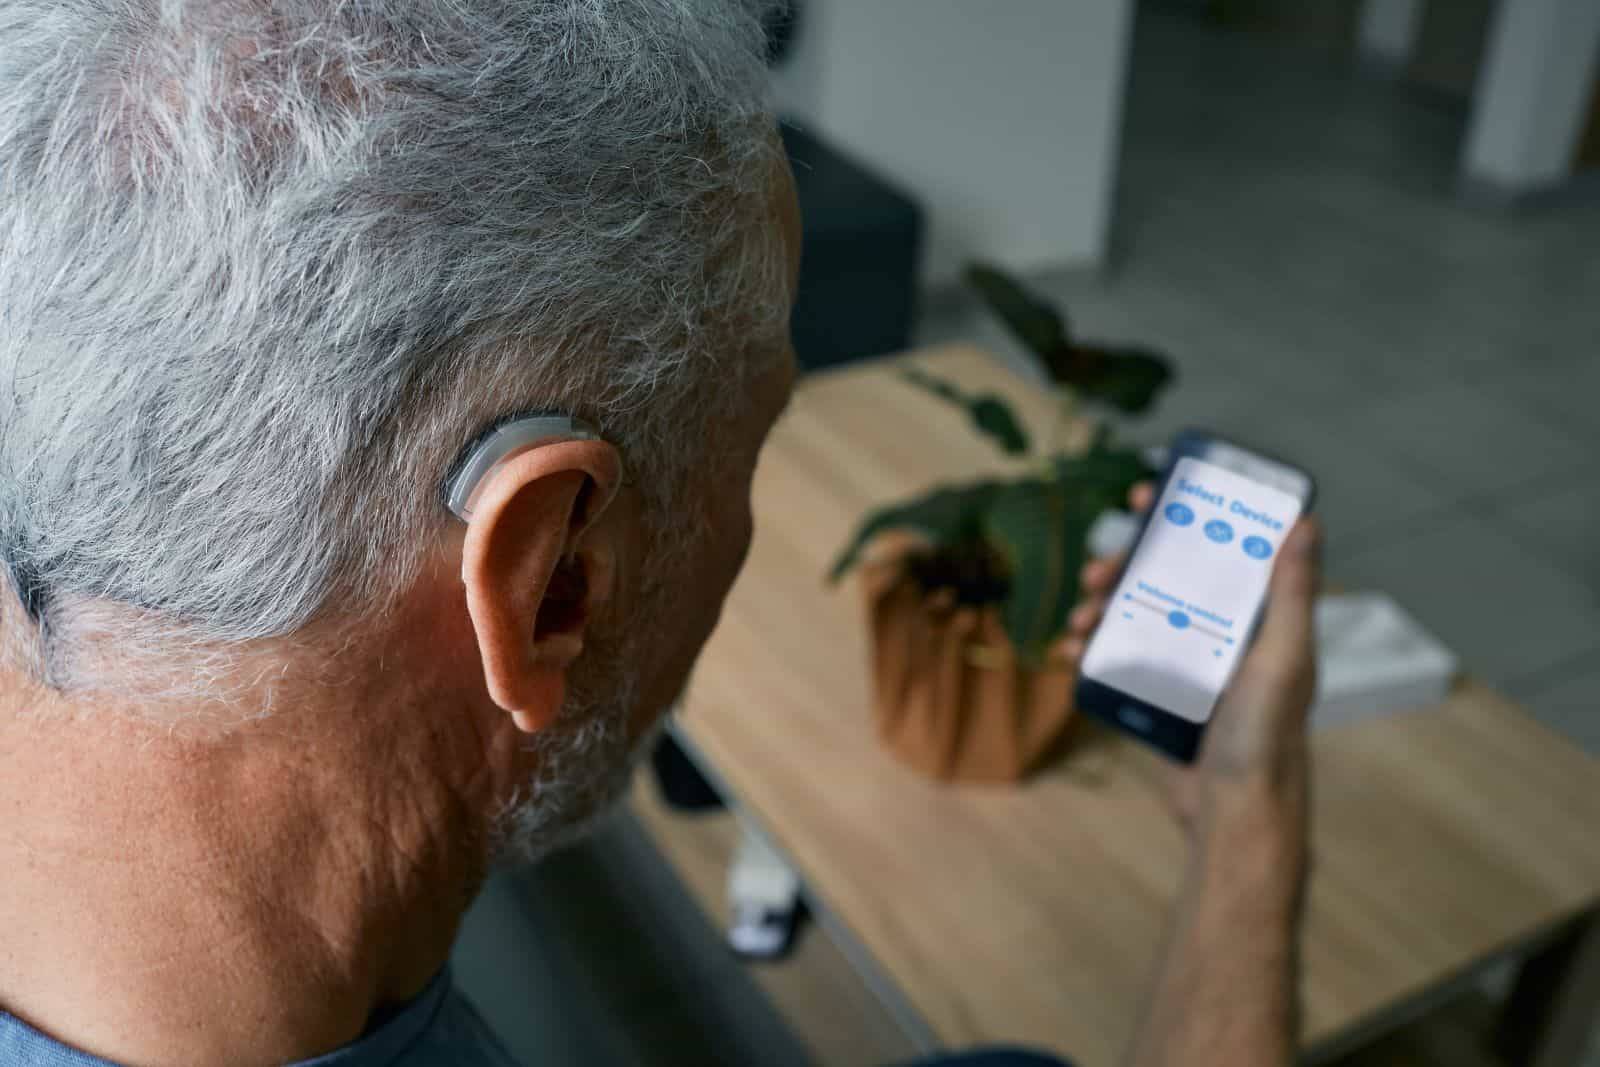 Senior man with hearing aids adjusting volume with phone app